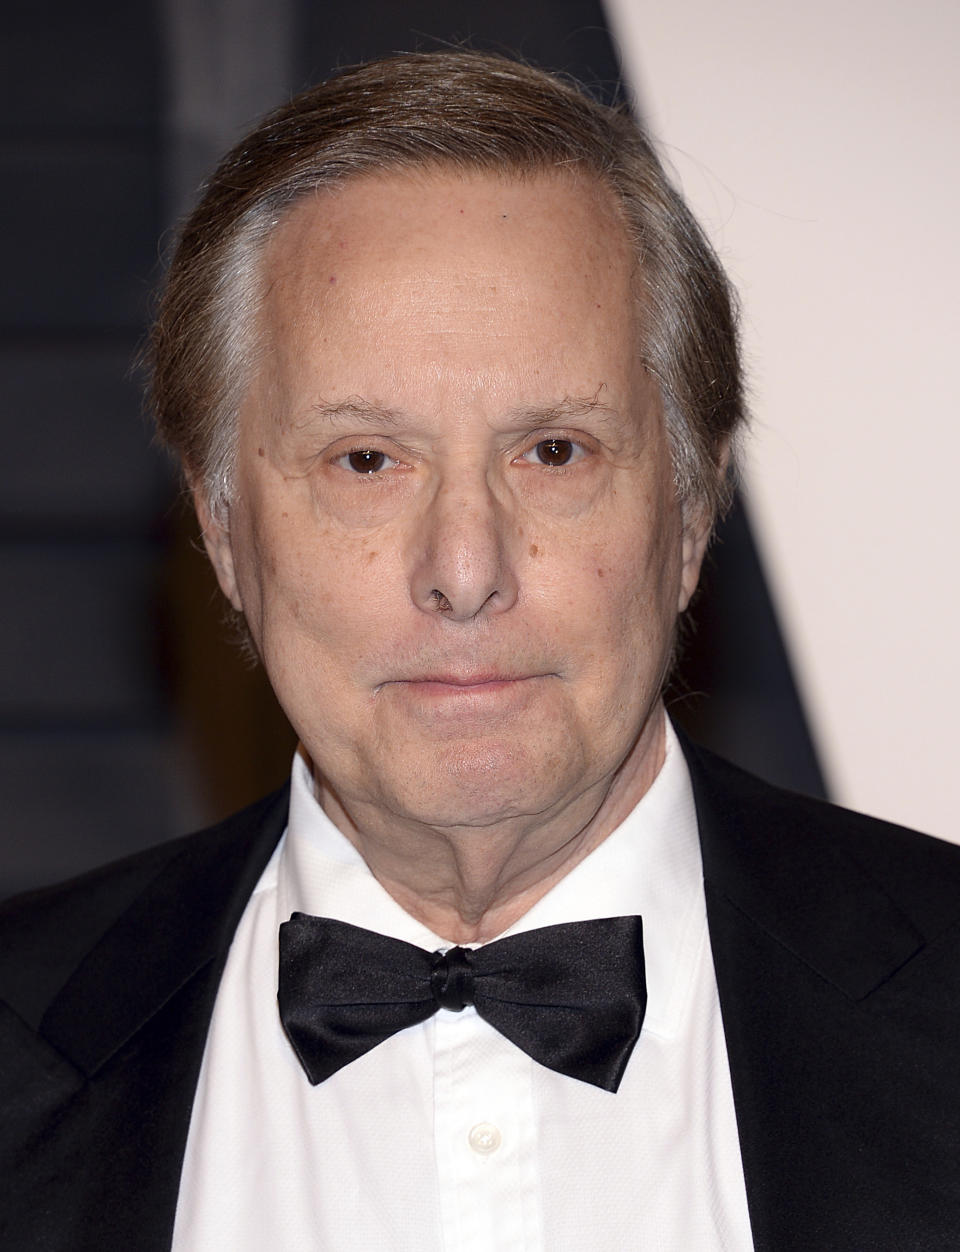 FILE - Director William Friedkin arrives at the Vanity Fair Oscar Party on Sunday, Feb. 22, 2015, in Beverly Hills, Calif. Friedkin, who won the best director Oscar for “The French Connection,” died Monday, Aug. 7, 2023, in Los Angeles, his wife, producer and former studio head Sherry Lansing told The Hollywood Reporter. (Photo by Evan Agostini/Invision/AP, File)